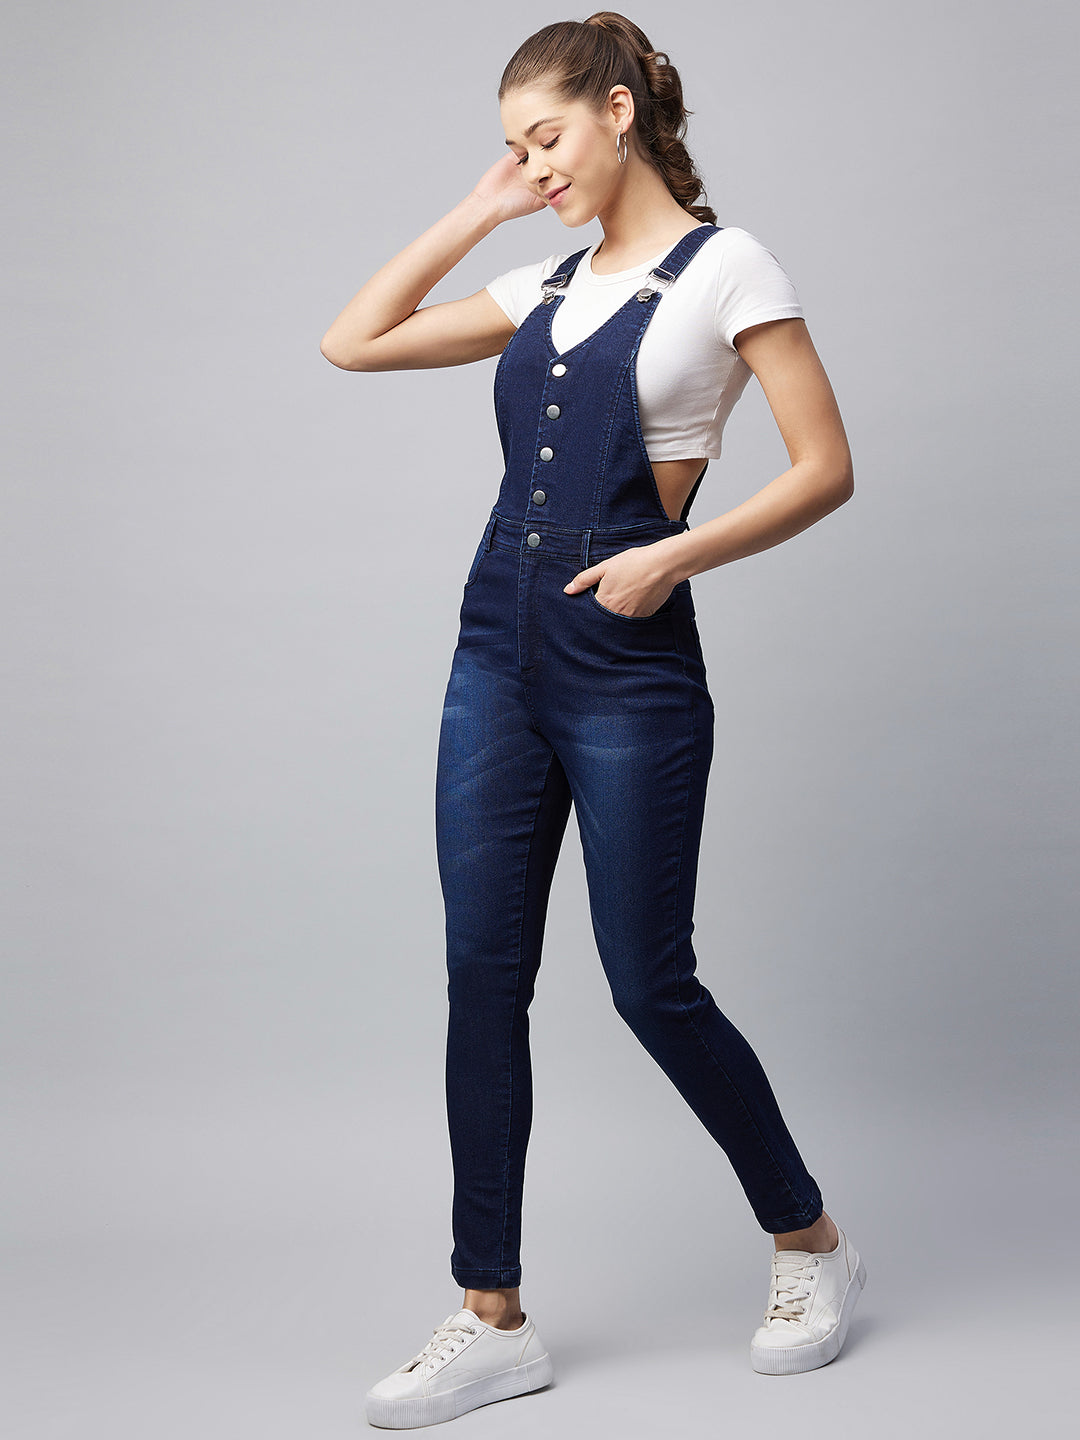 Navy-Blue-Denim-Lycra-Dungaree-(T-Shirt-Not-Included)